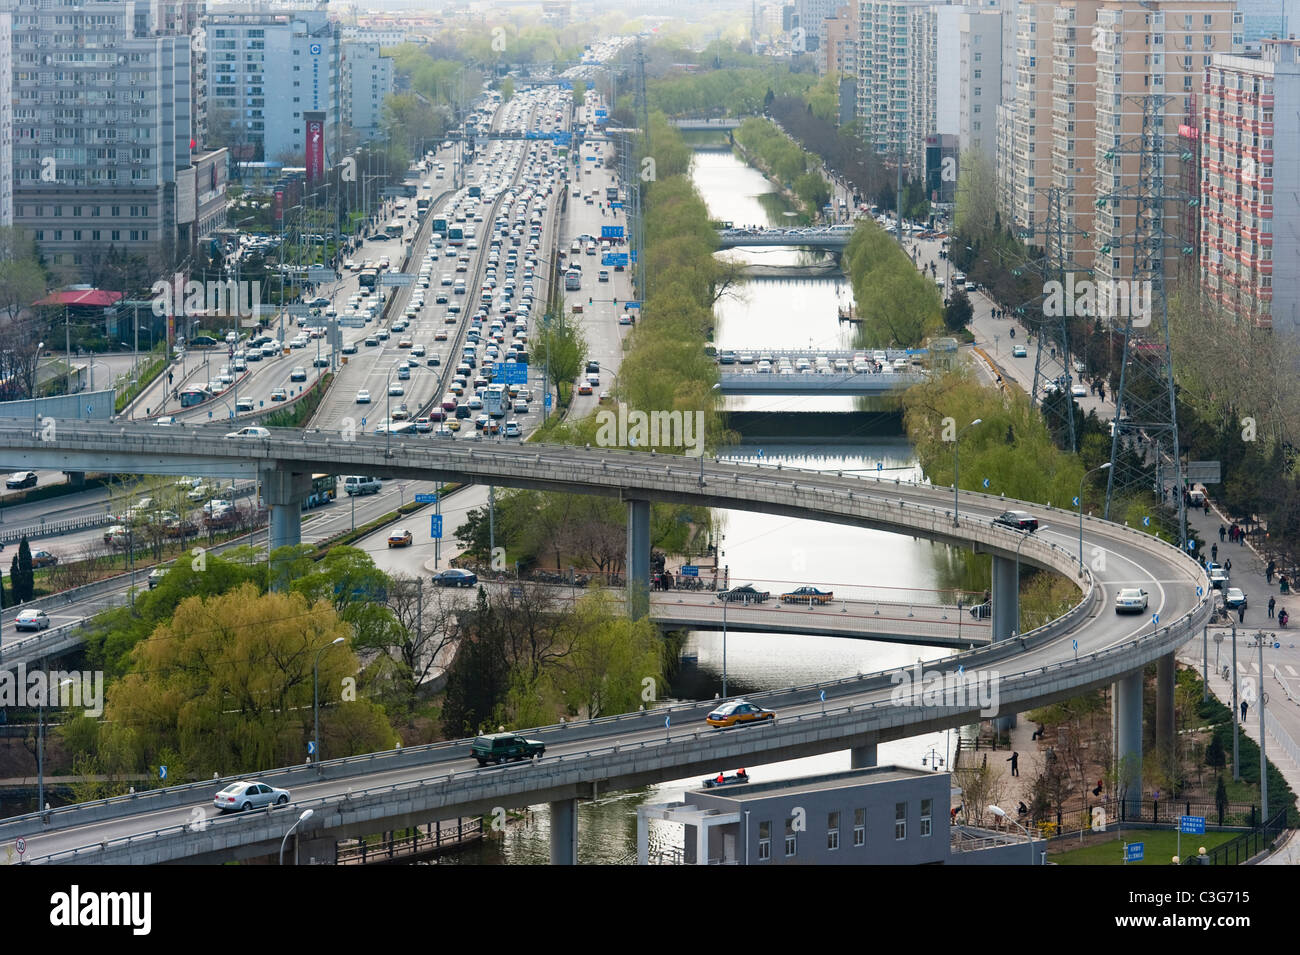 Trafic, Chaoyang District, Beijing, Chine, Asie. Banque D'Images